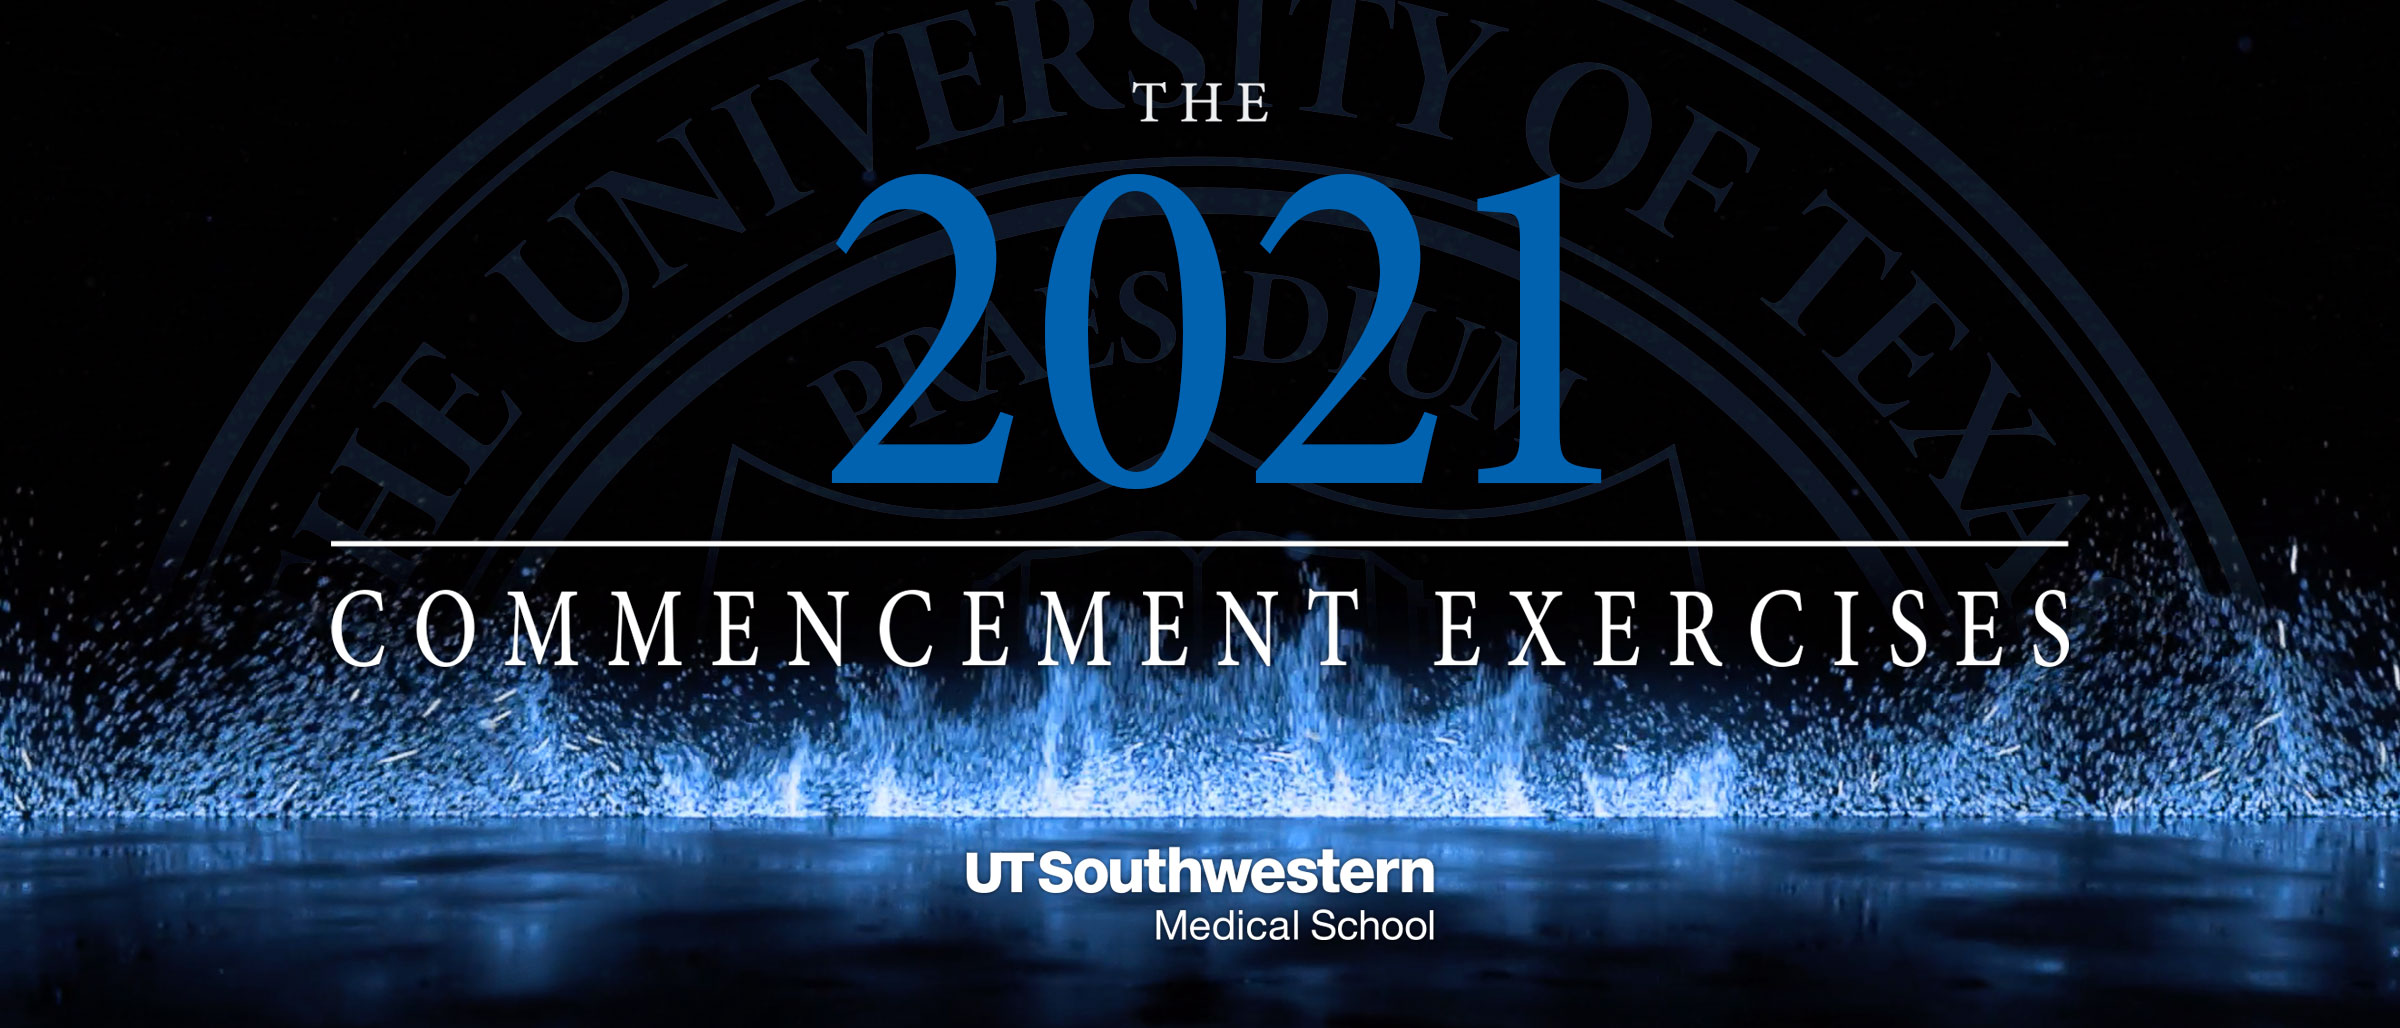 The 2021 Commencement Exercises